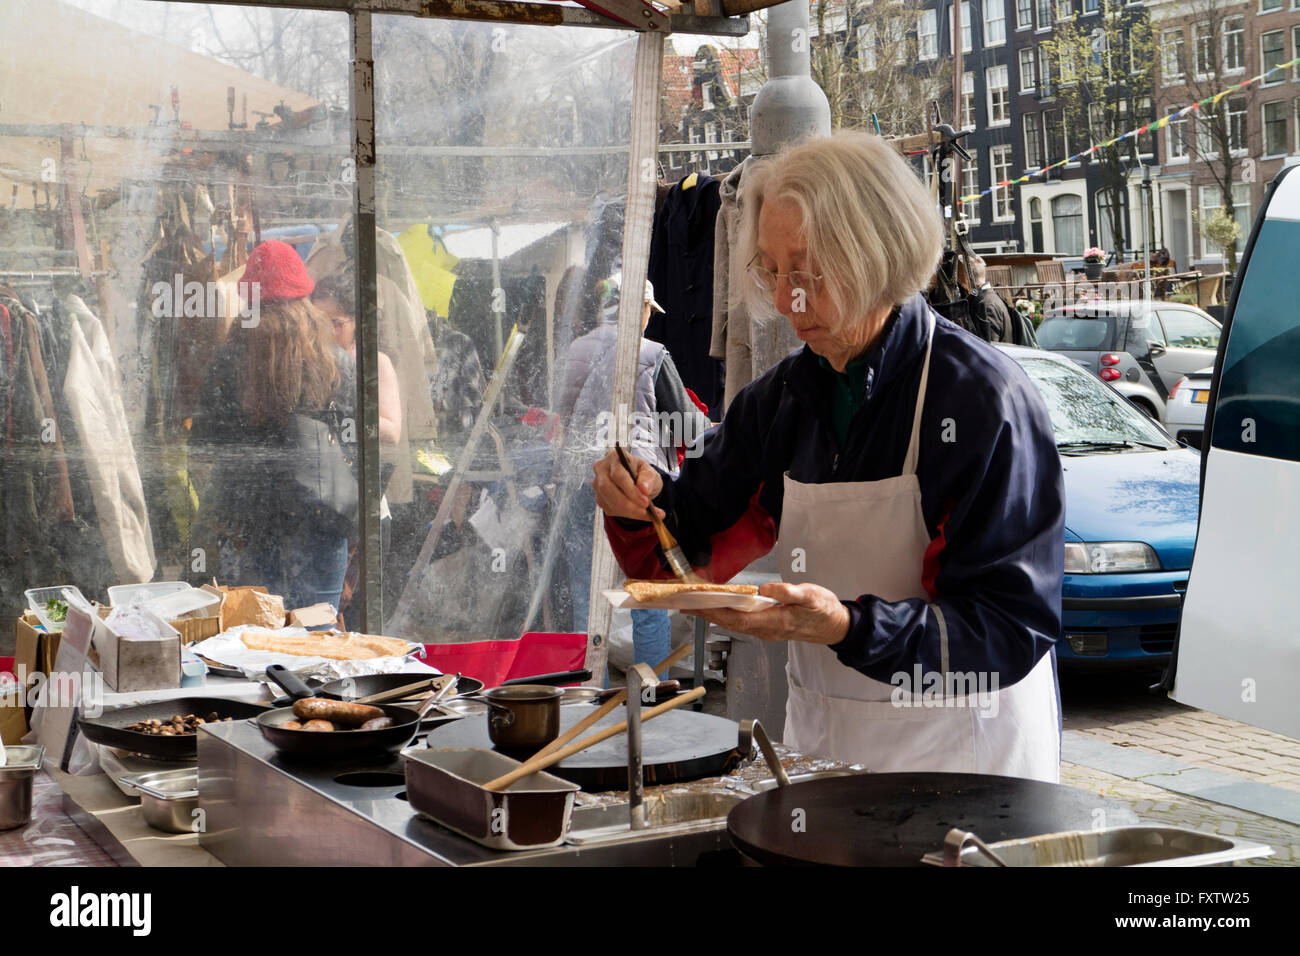 Selling and making fresh crepes at the market in Amsterdam, Holland Stock Photo